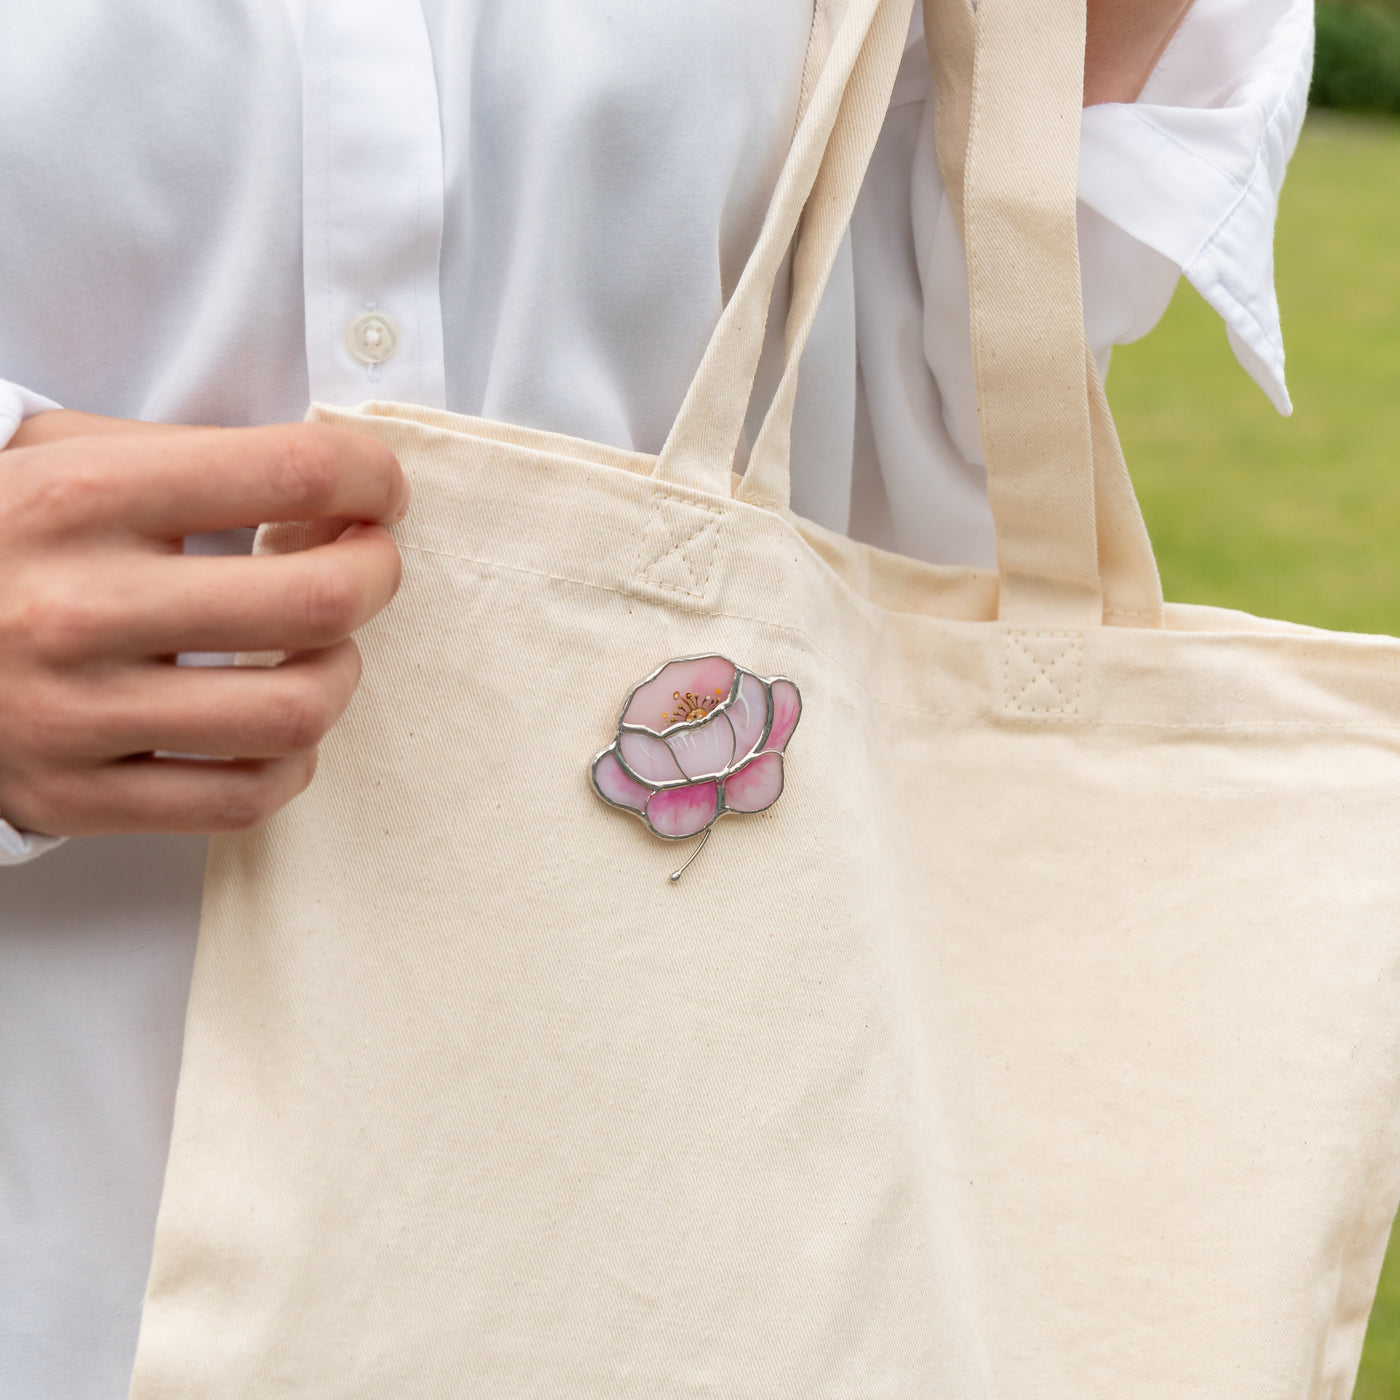 Peony brooch of stained glass on a shopping bag